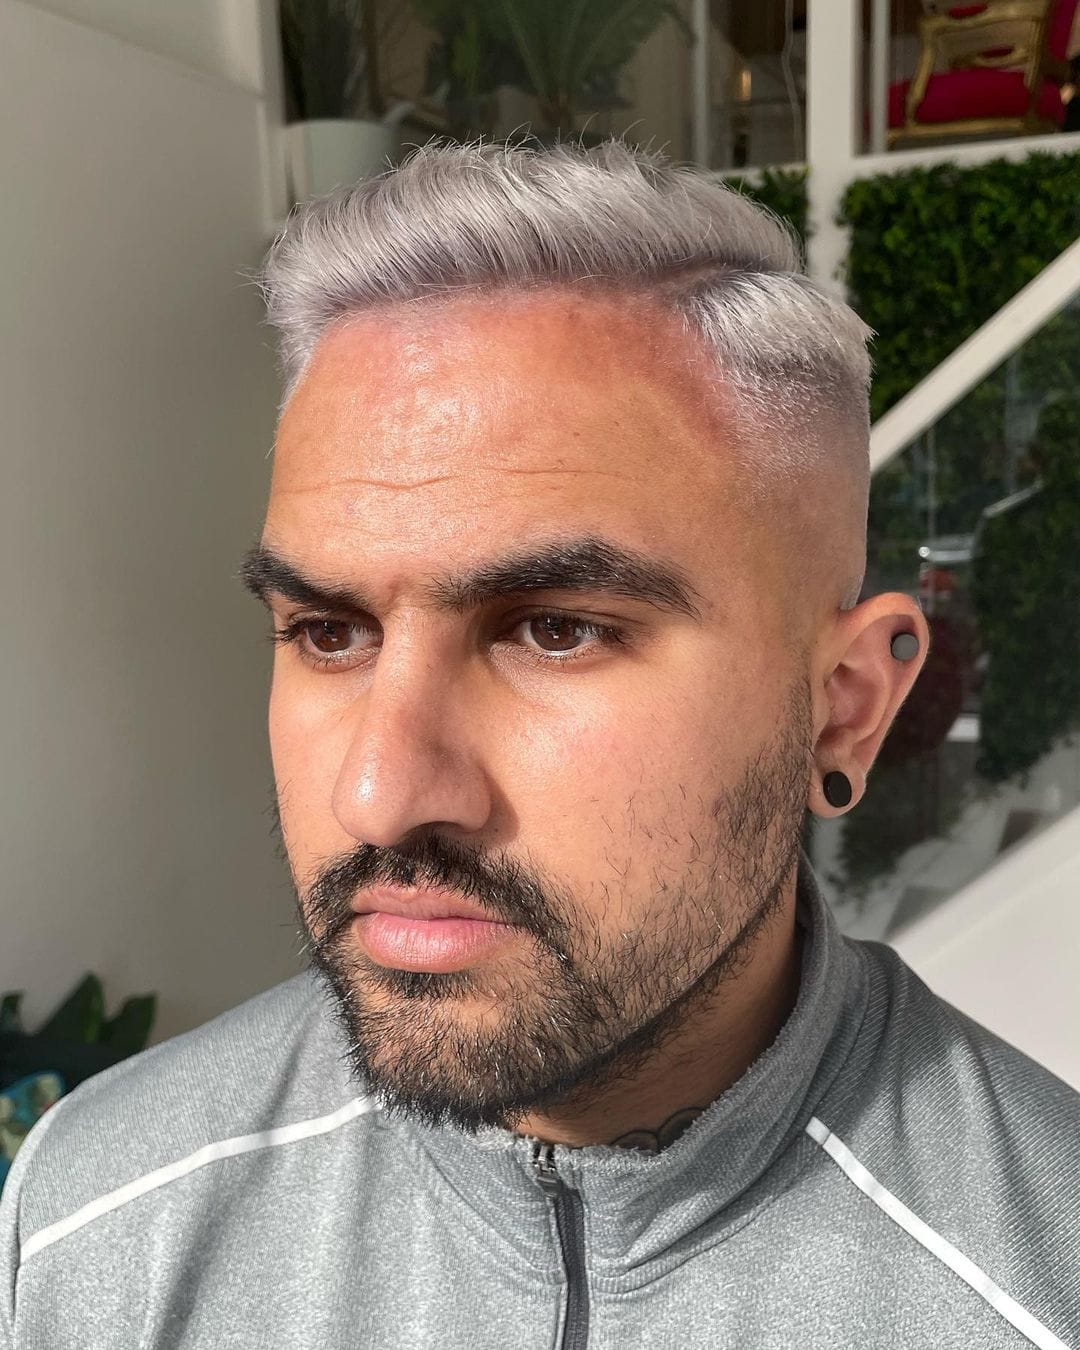 Silver hair for men with a side part